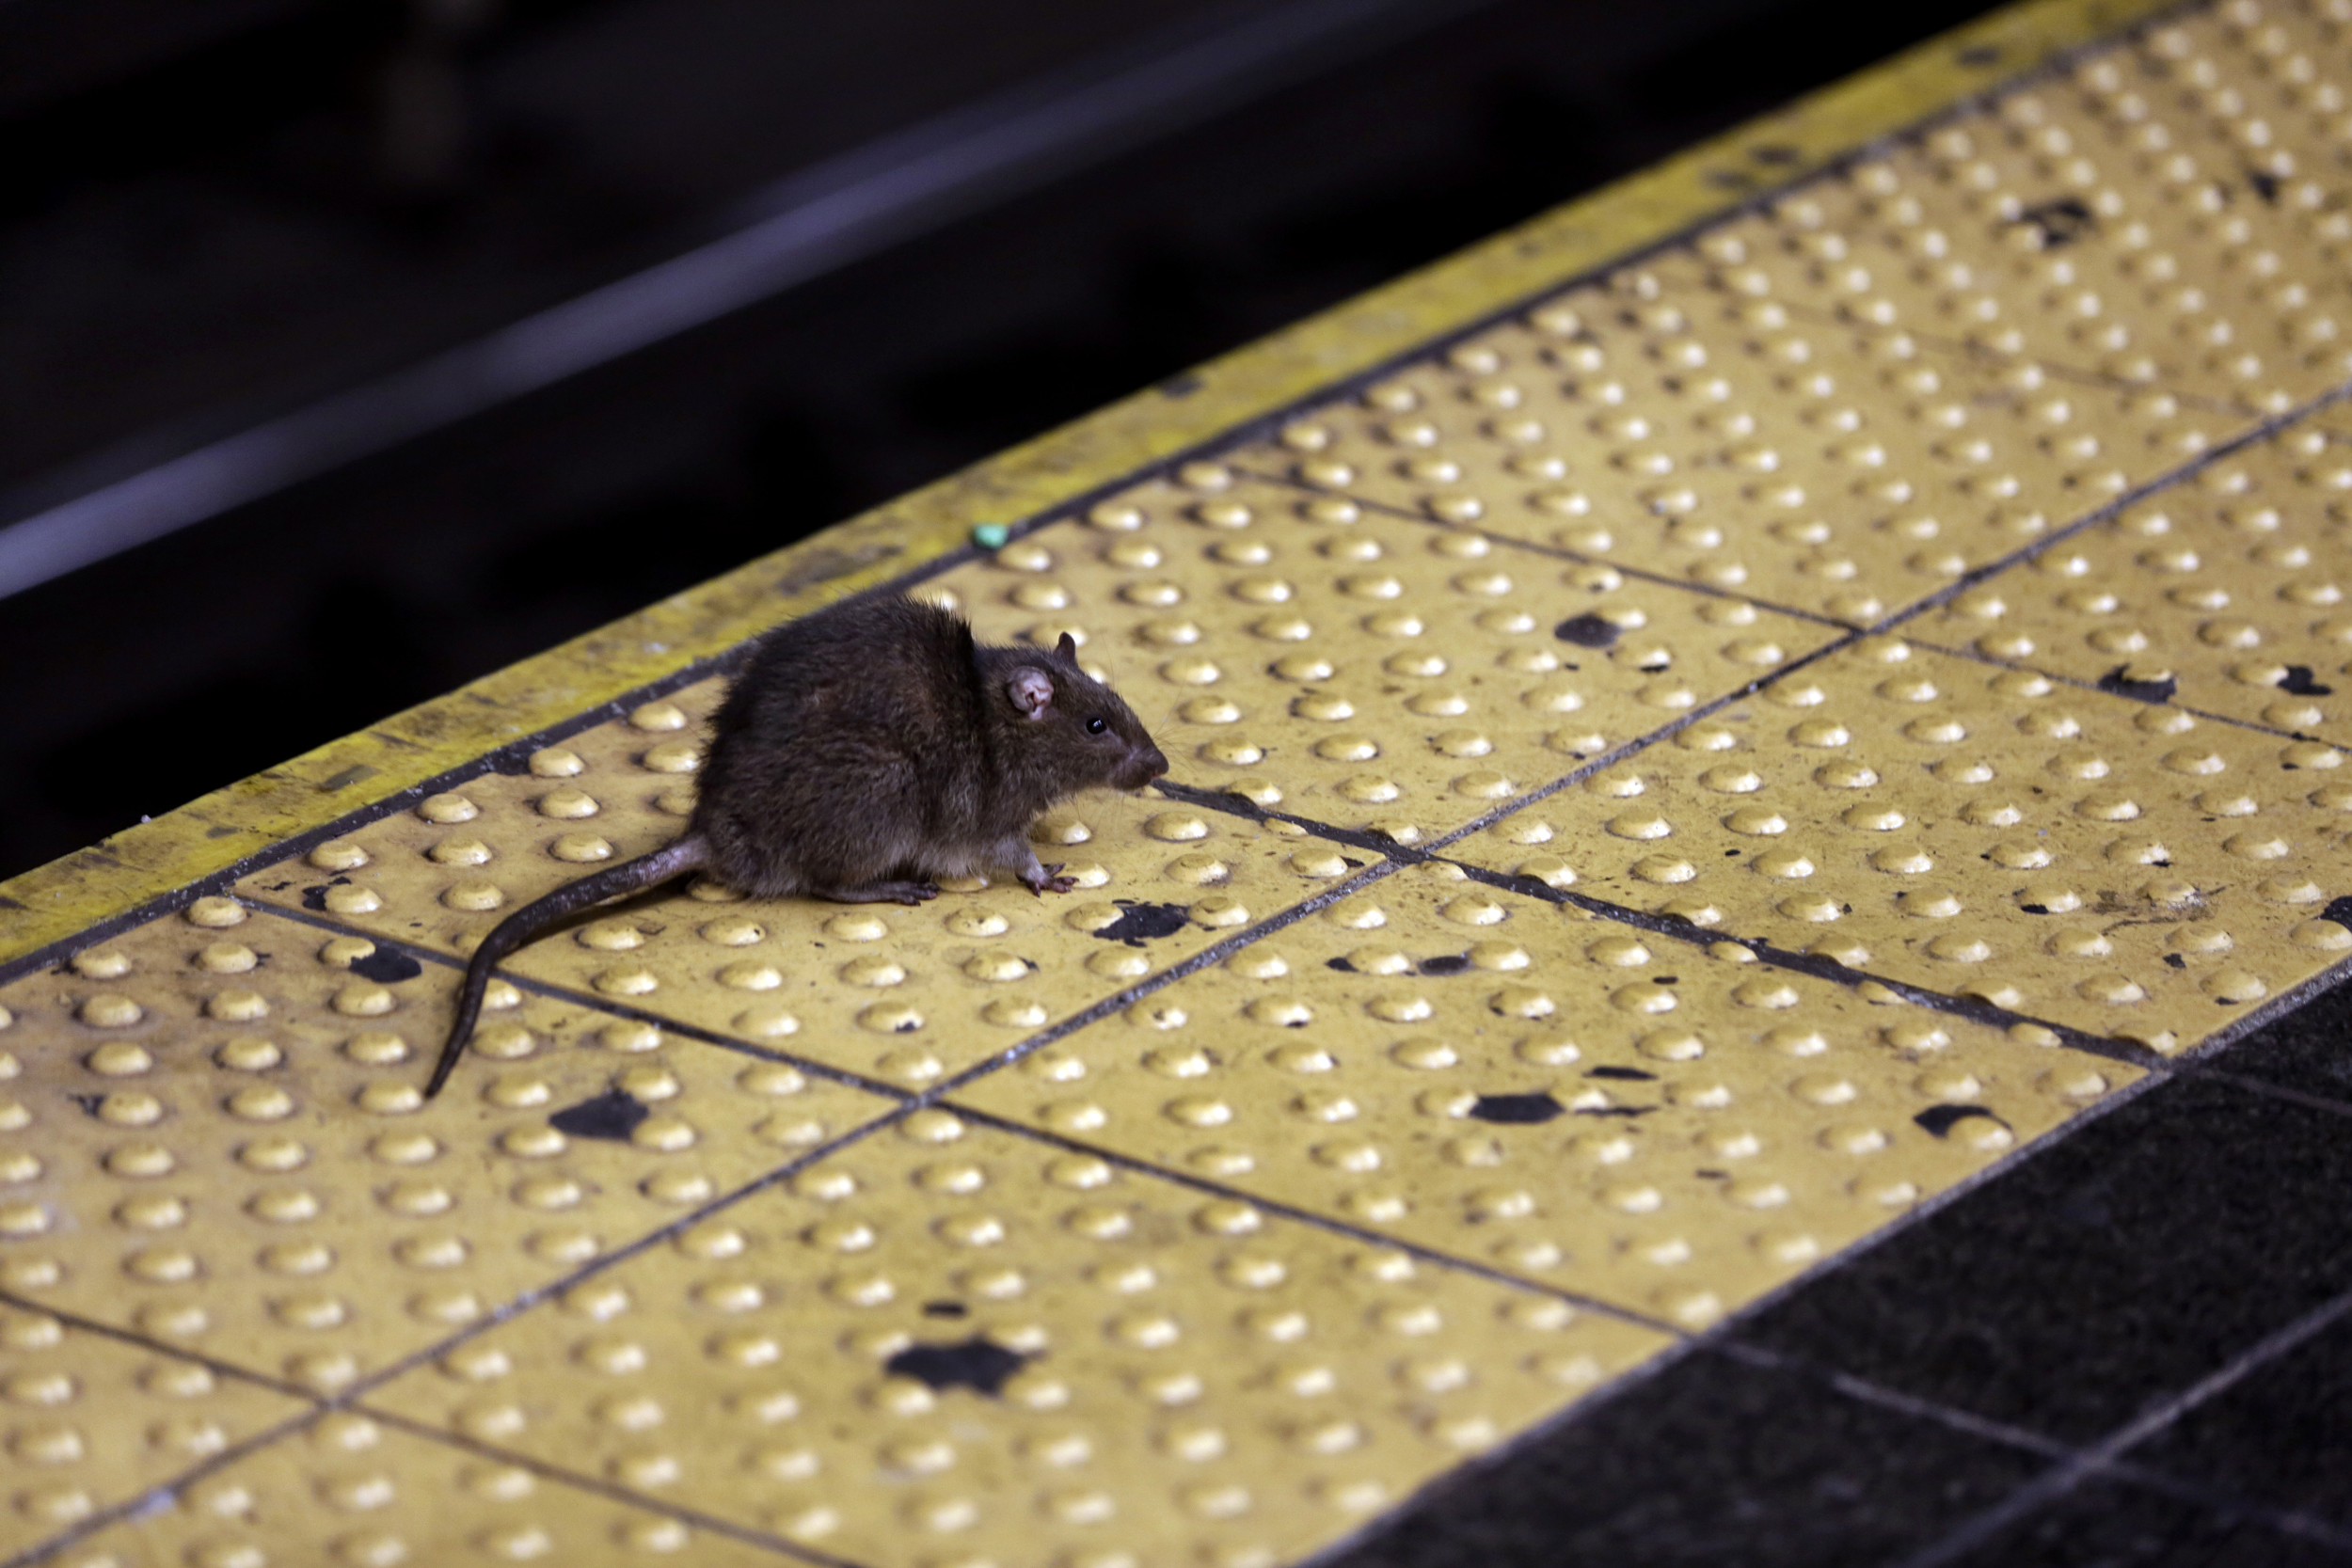 How long can a mouse starve?